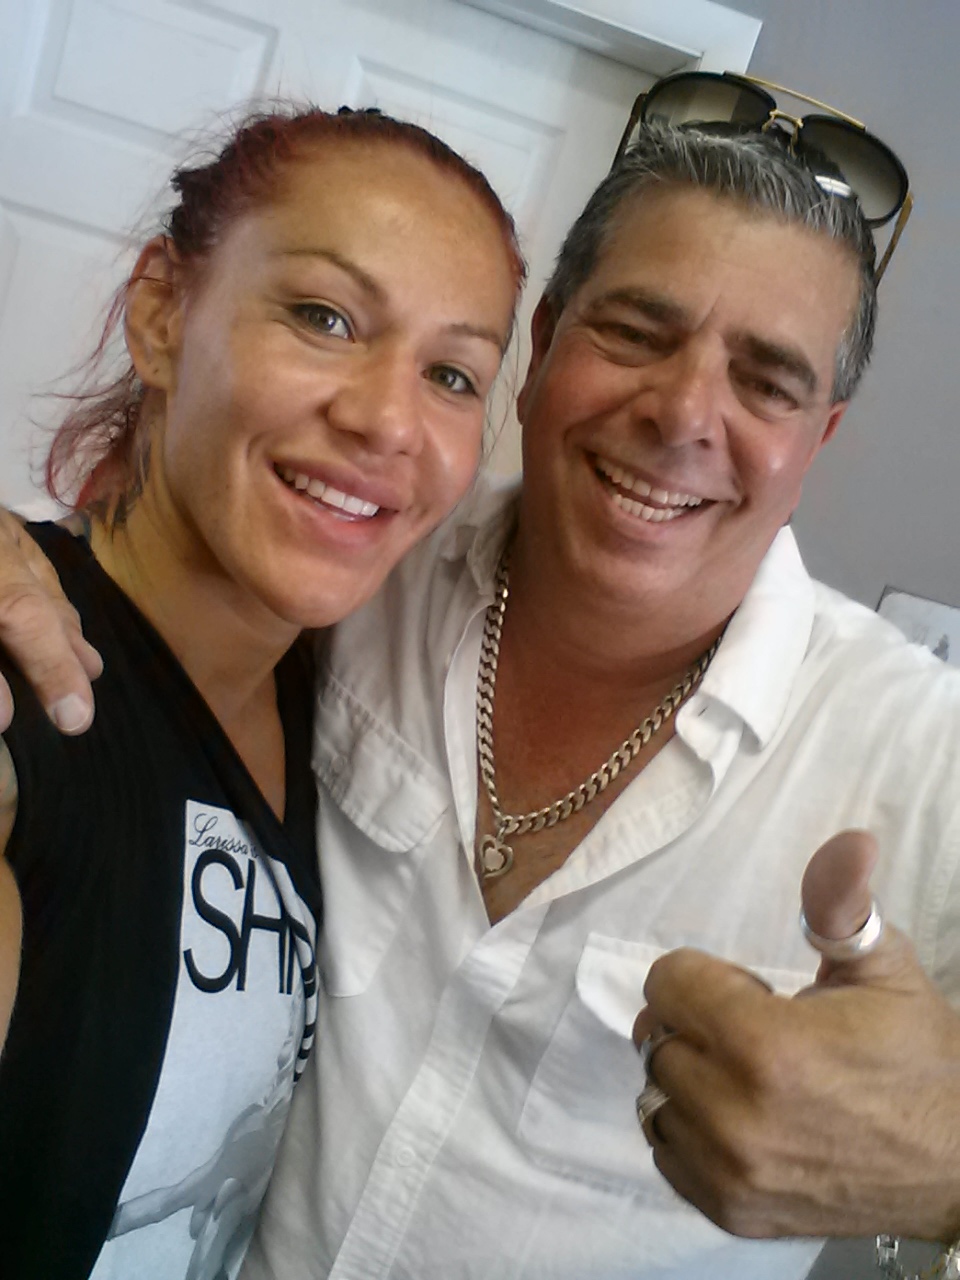 Cris Cyborg and Sal on set of Fight Valley.